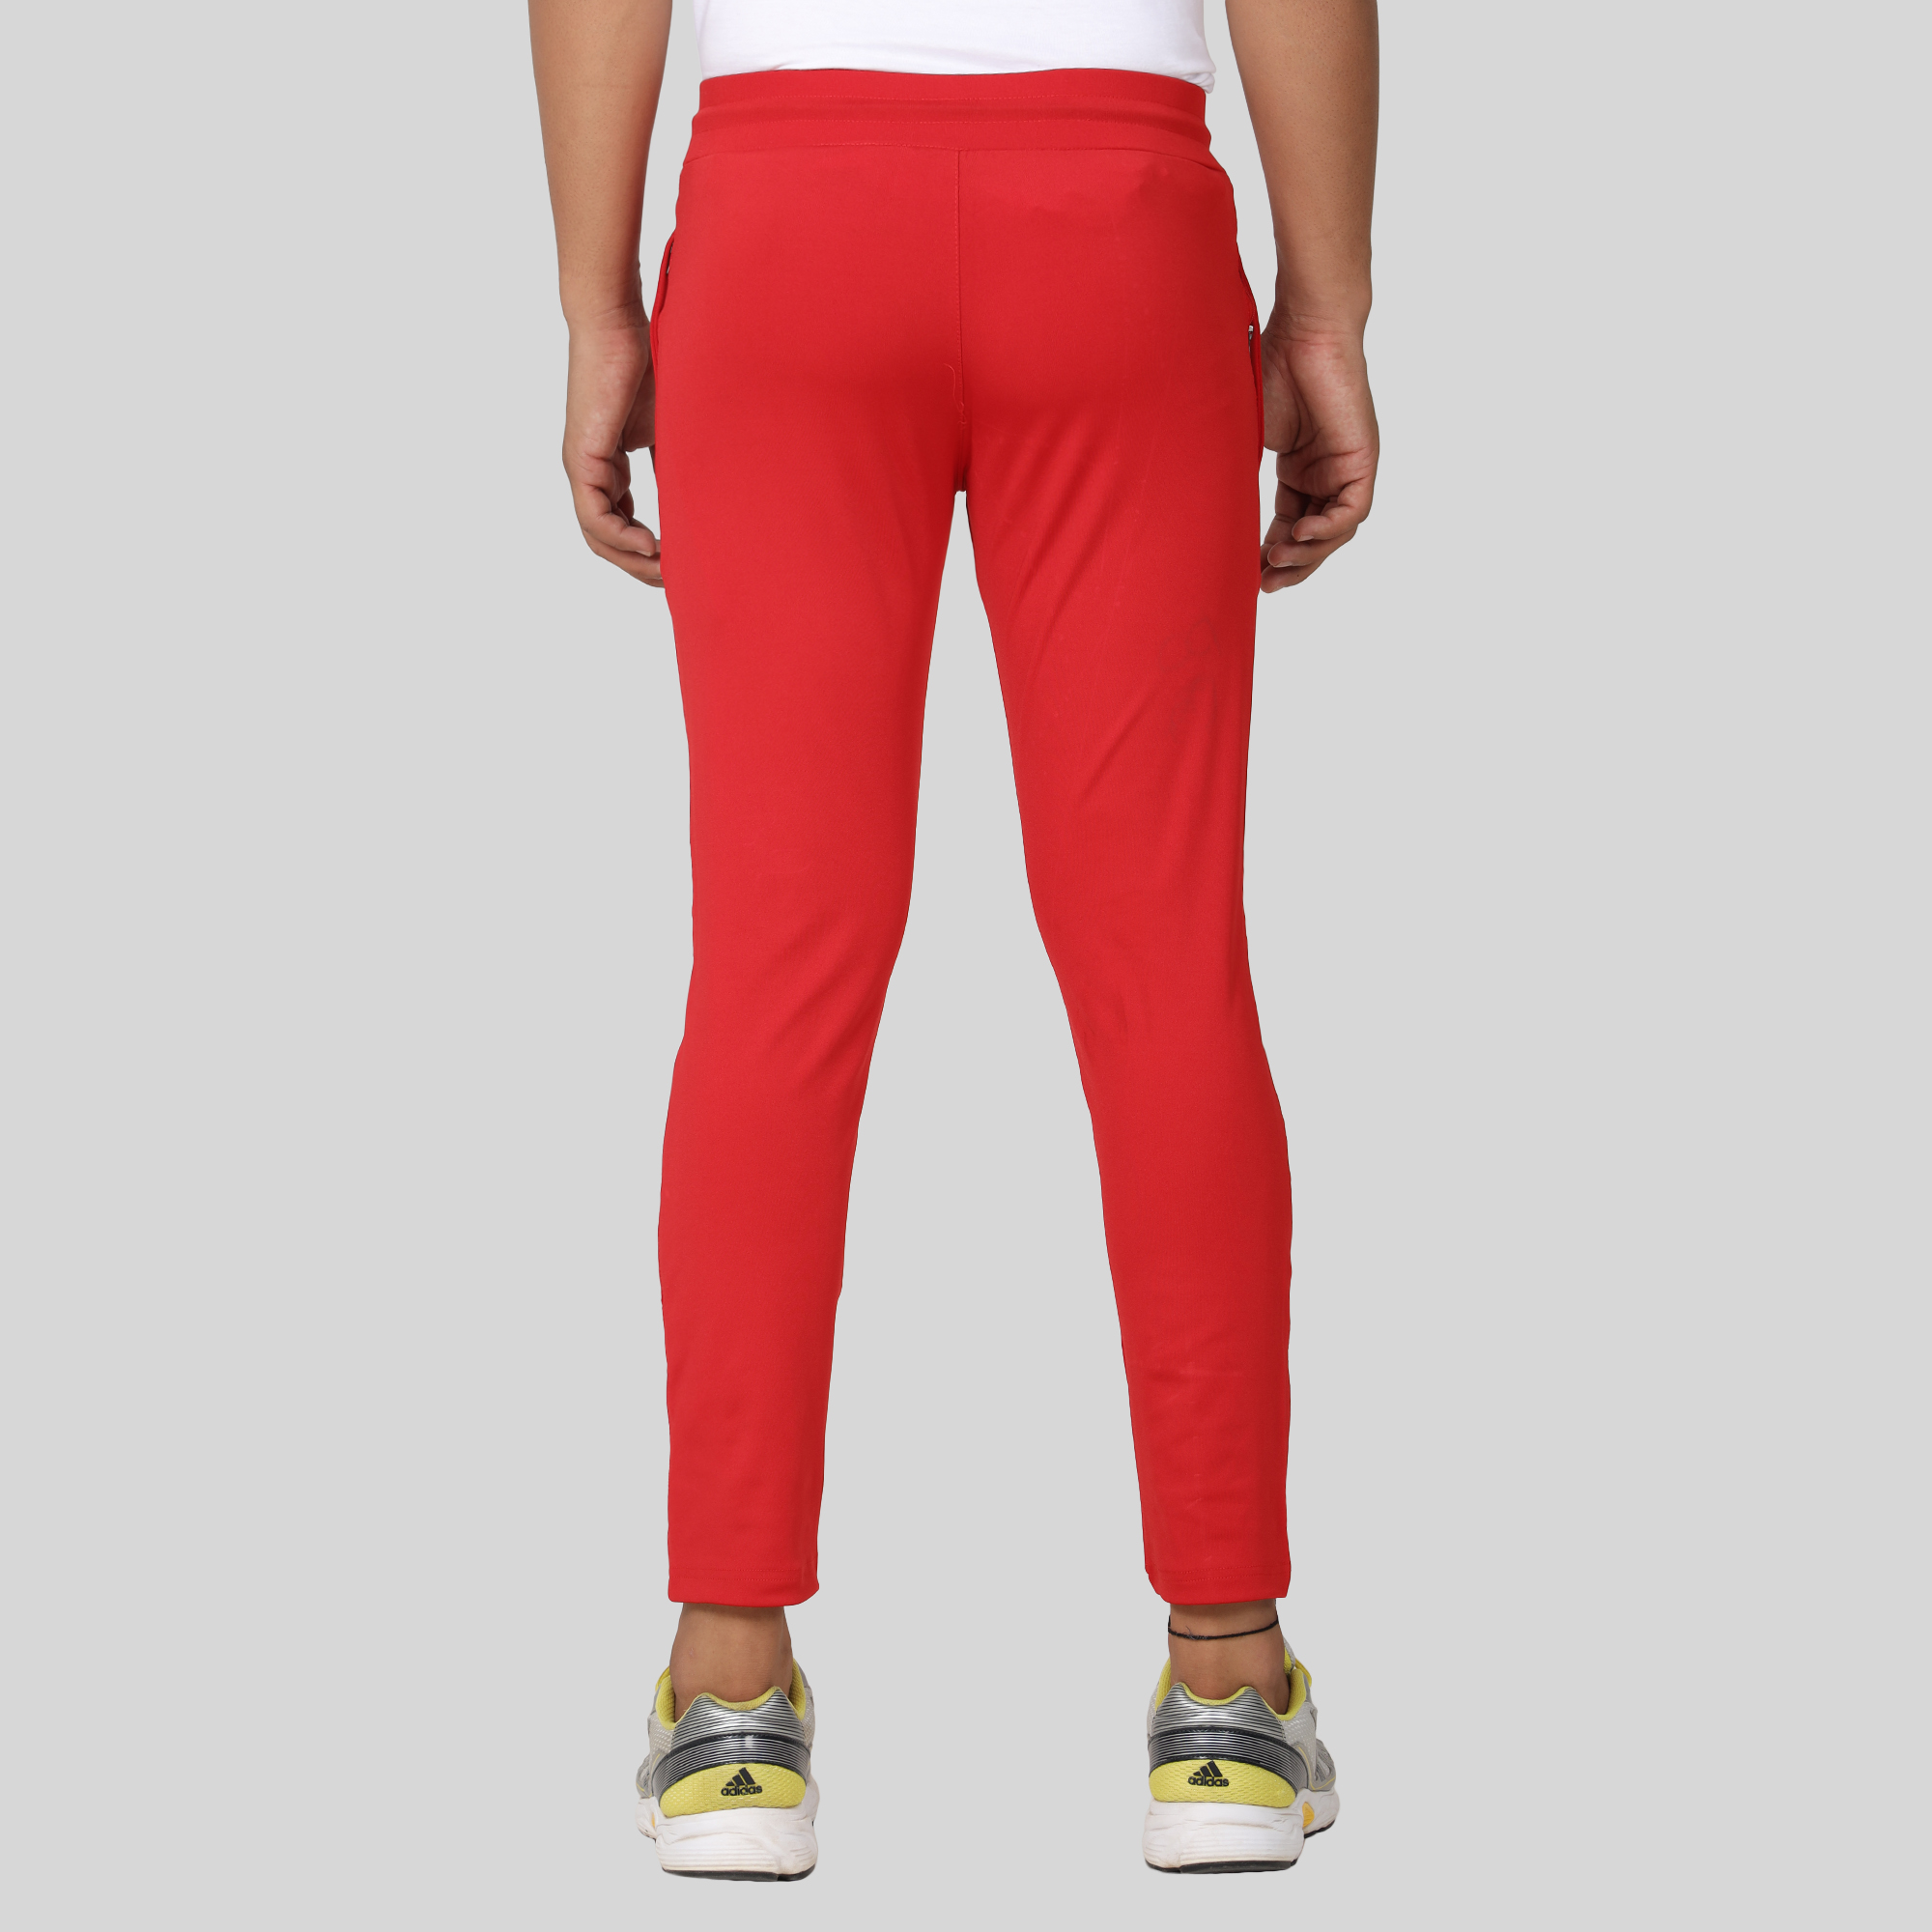 Nantucket Reds® M Crest Collection Men's Slim Fit Pant - Murray's Toggery  Shop